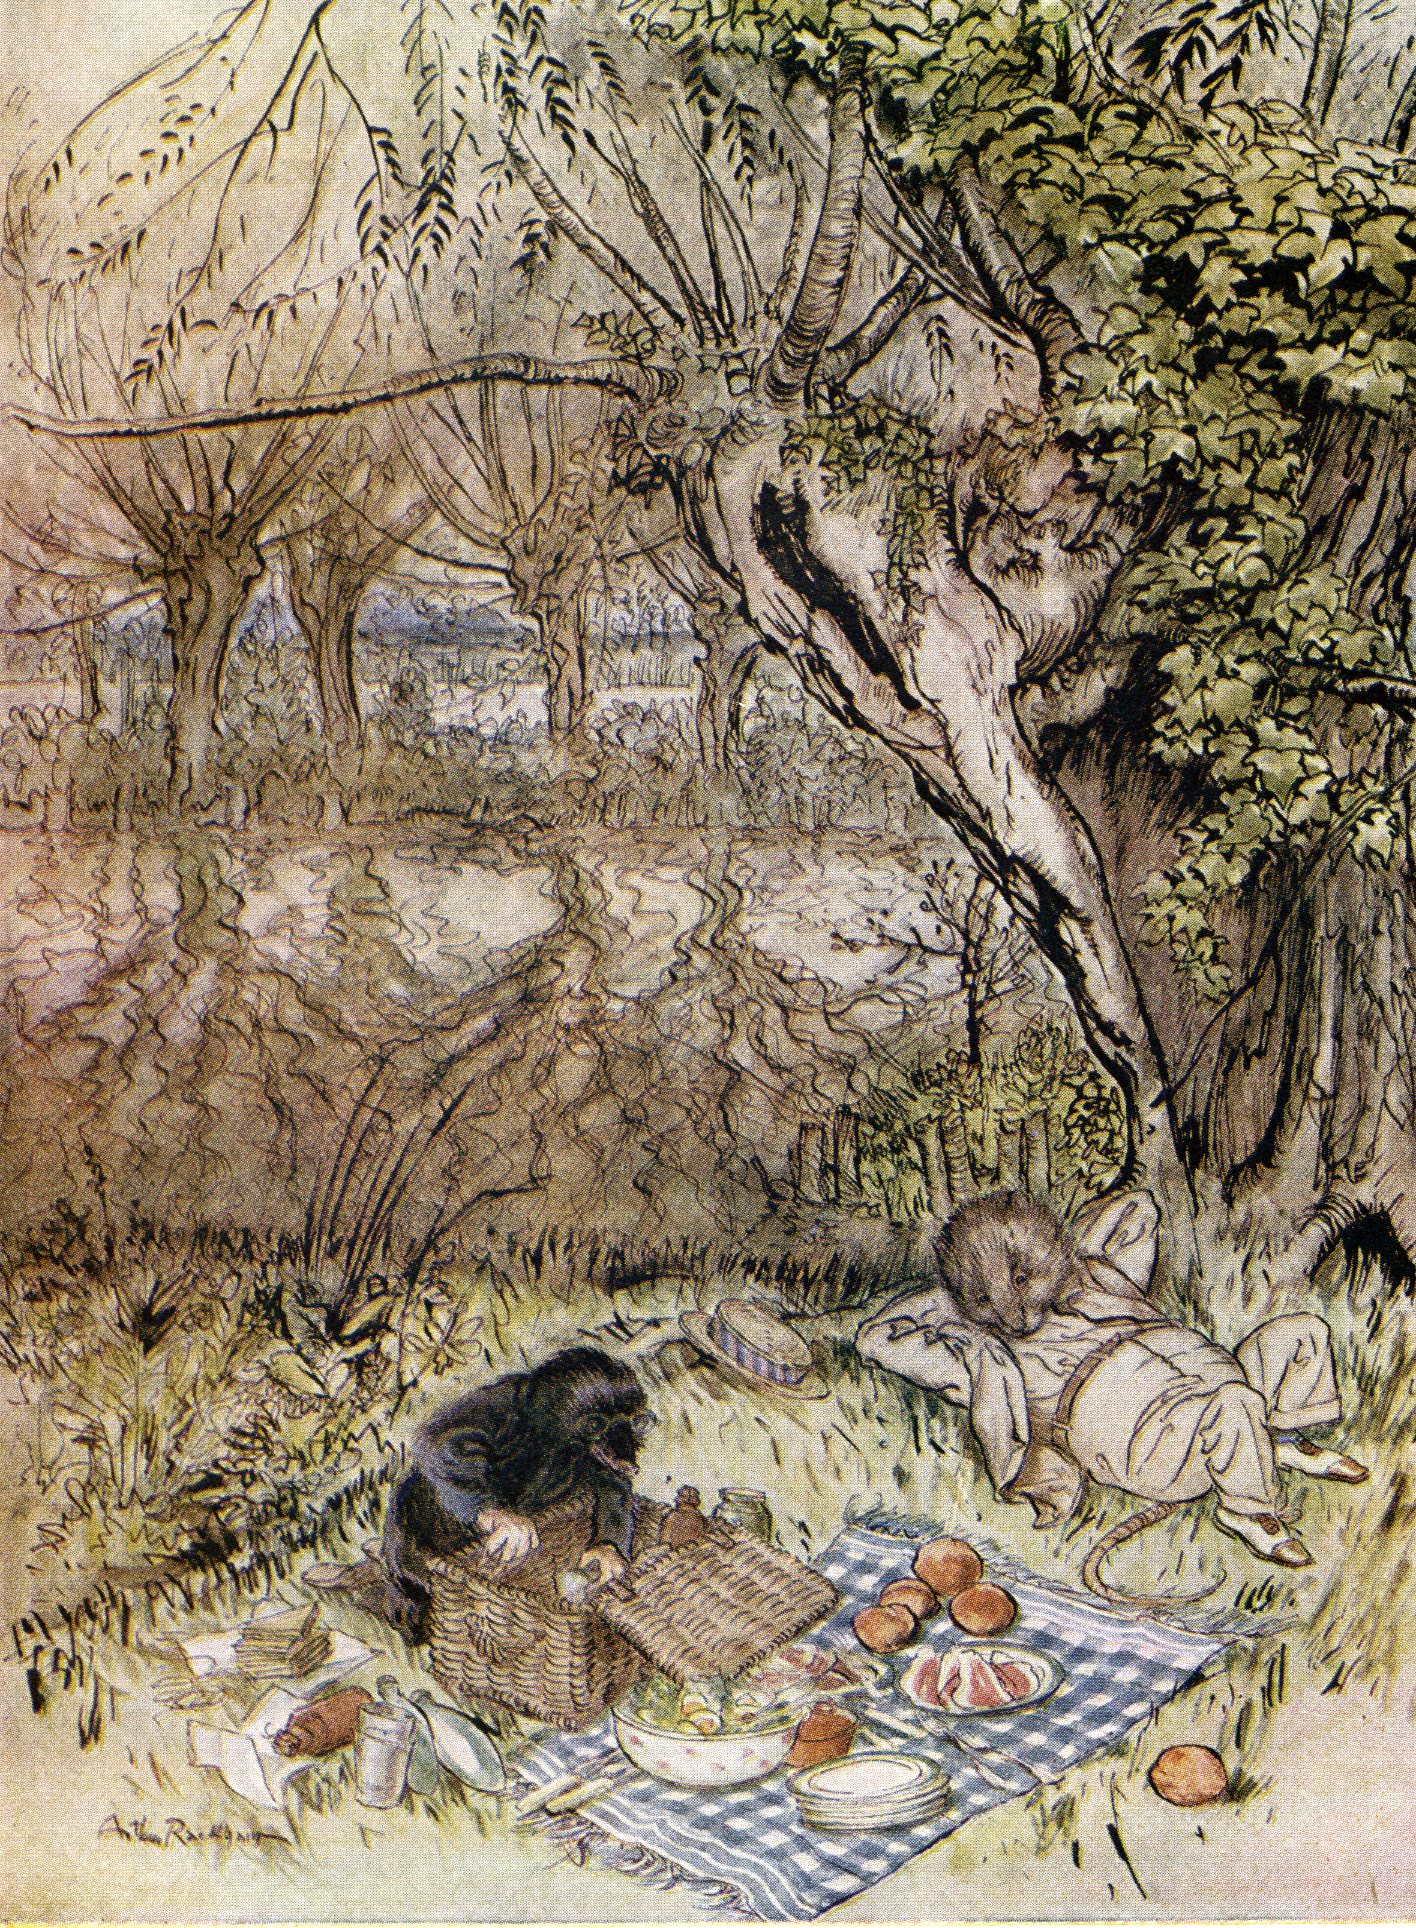 Arthur Rackham’s Riverbank Picnic in The Wind in the Willows (1940)